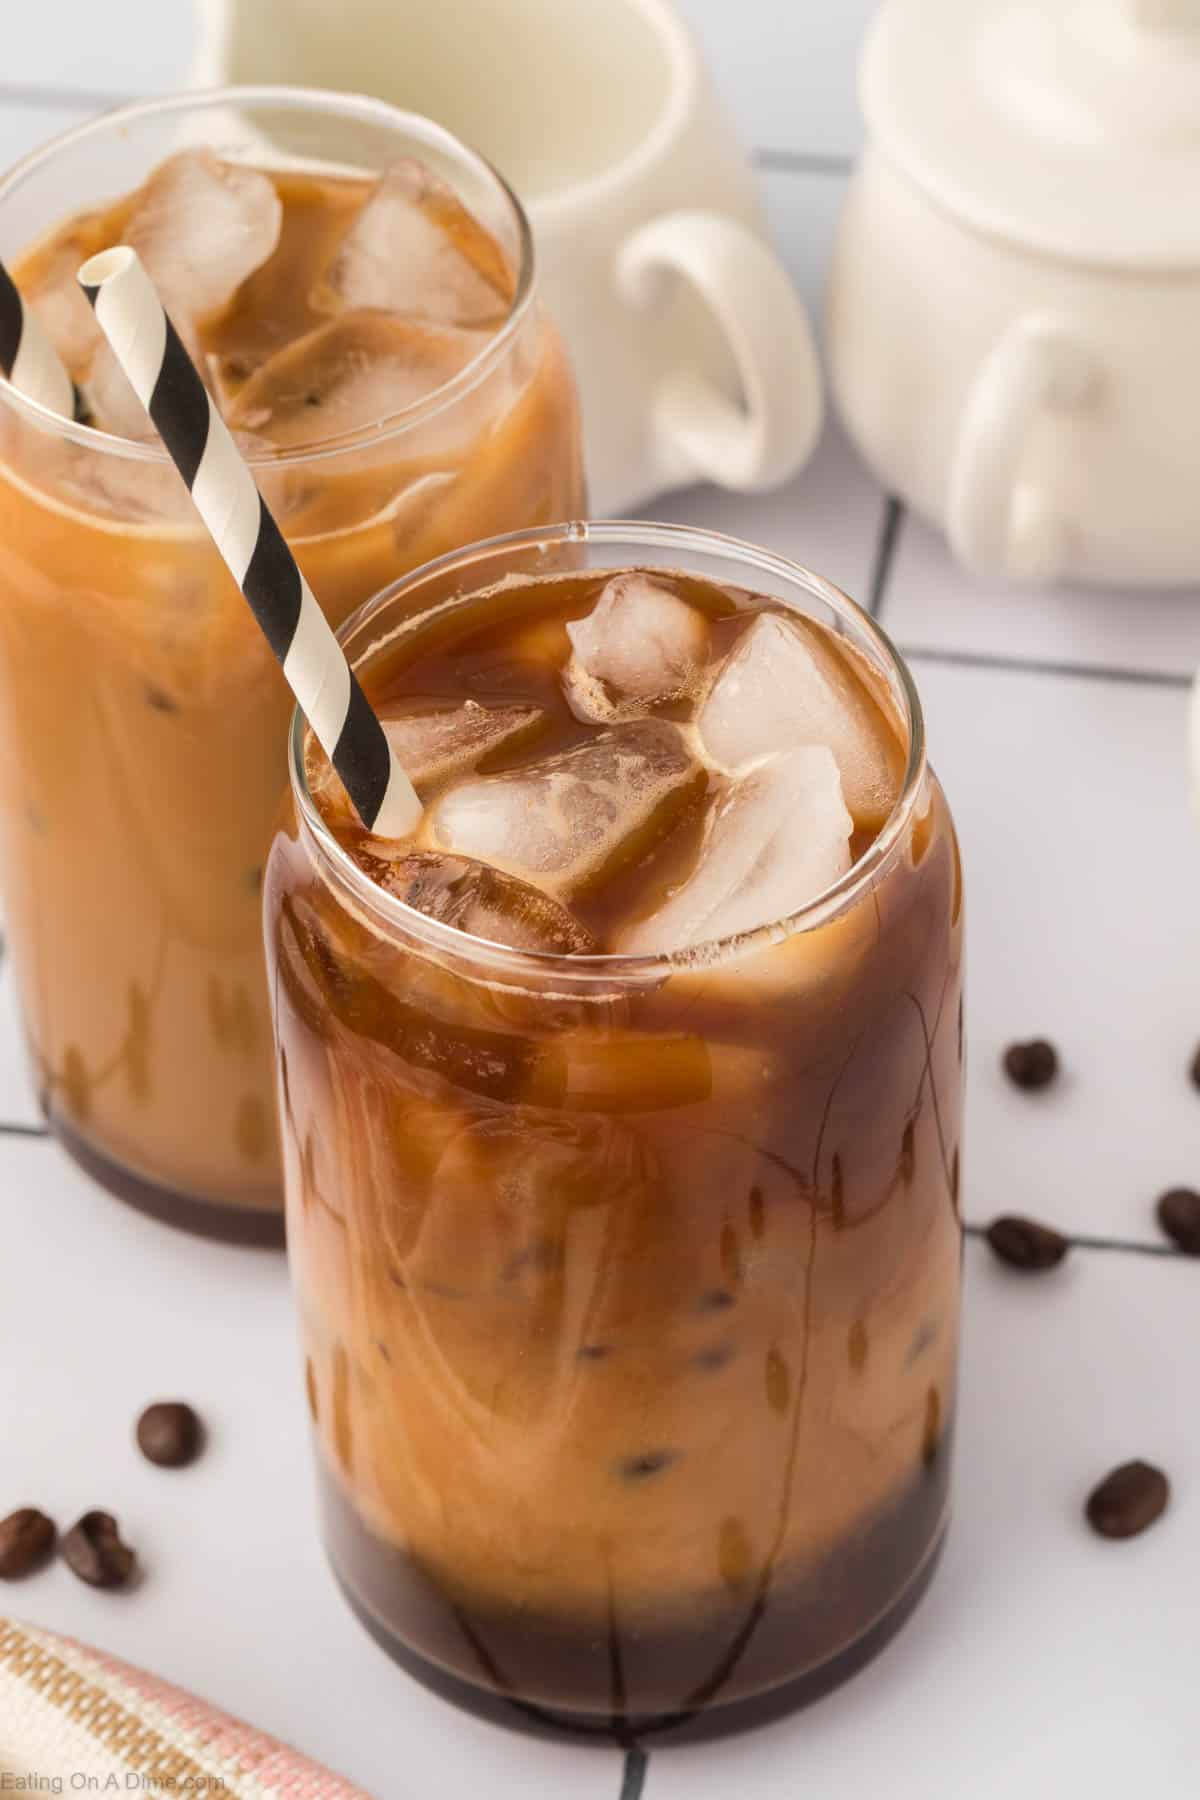 Ice coffee in a clear glass with a straw